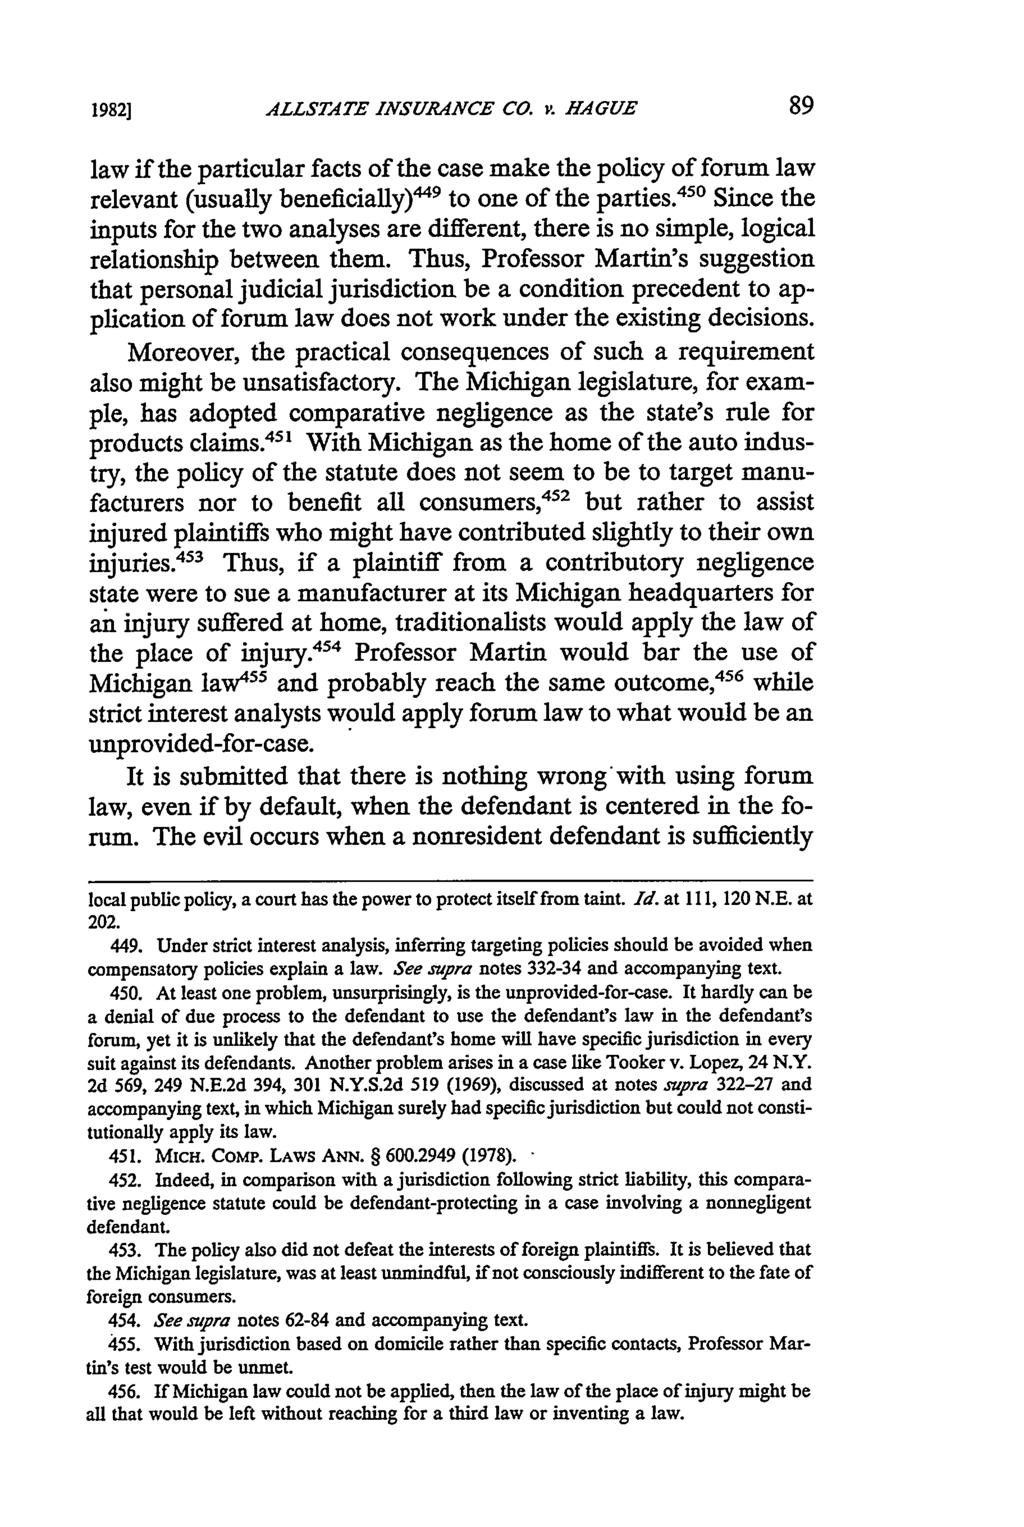 1982] ALLSTATE INSURANCE CO. v. HAGUE law if the particular facts of the case make the policy of forum law relevant (usually beneficially) 4 9 to one of the parties.